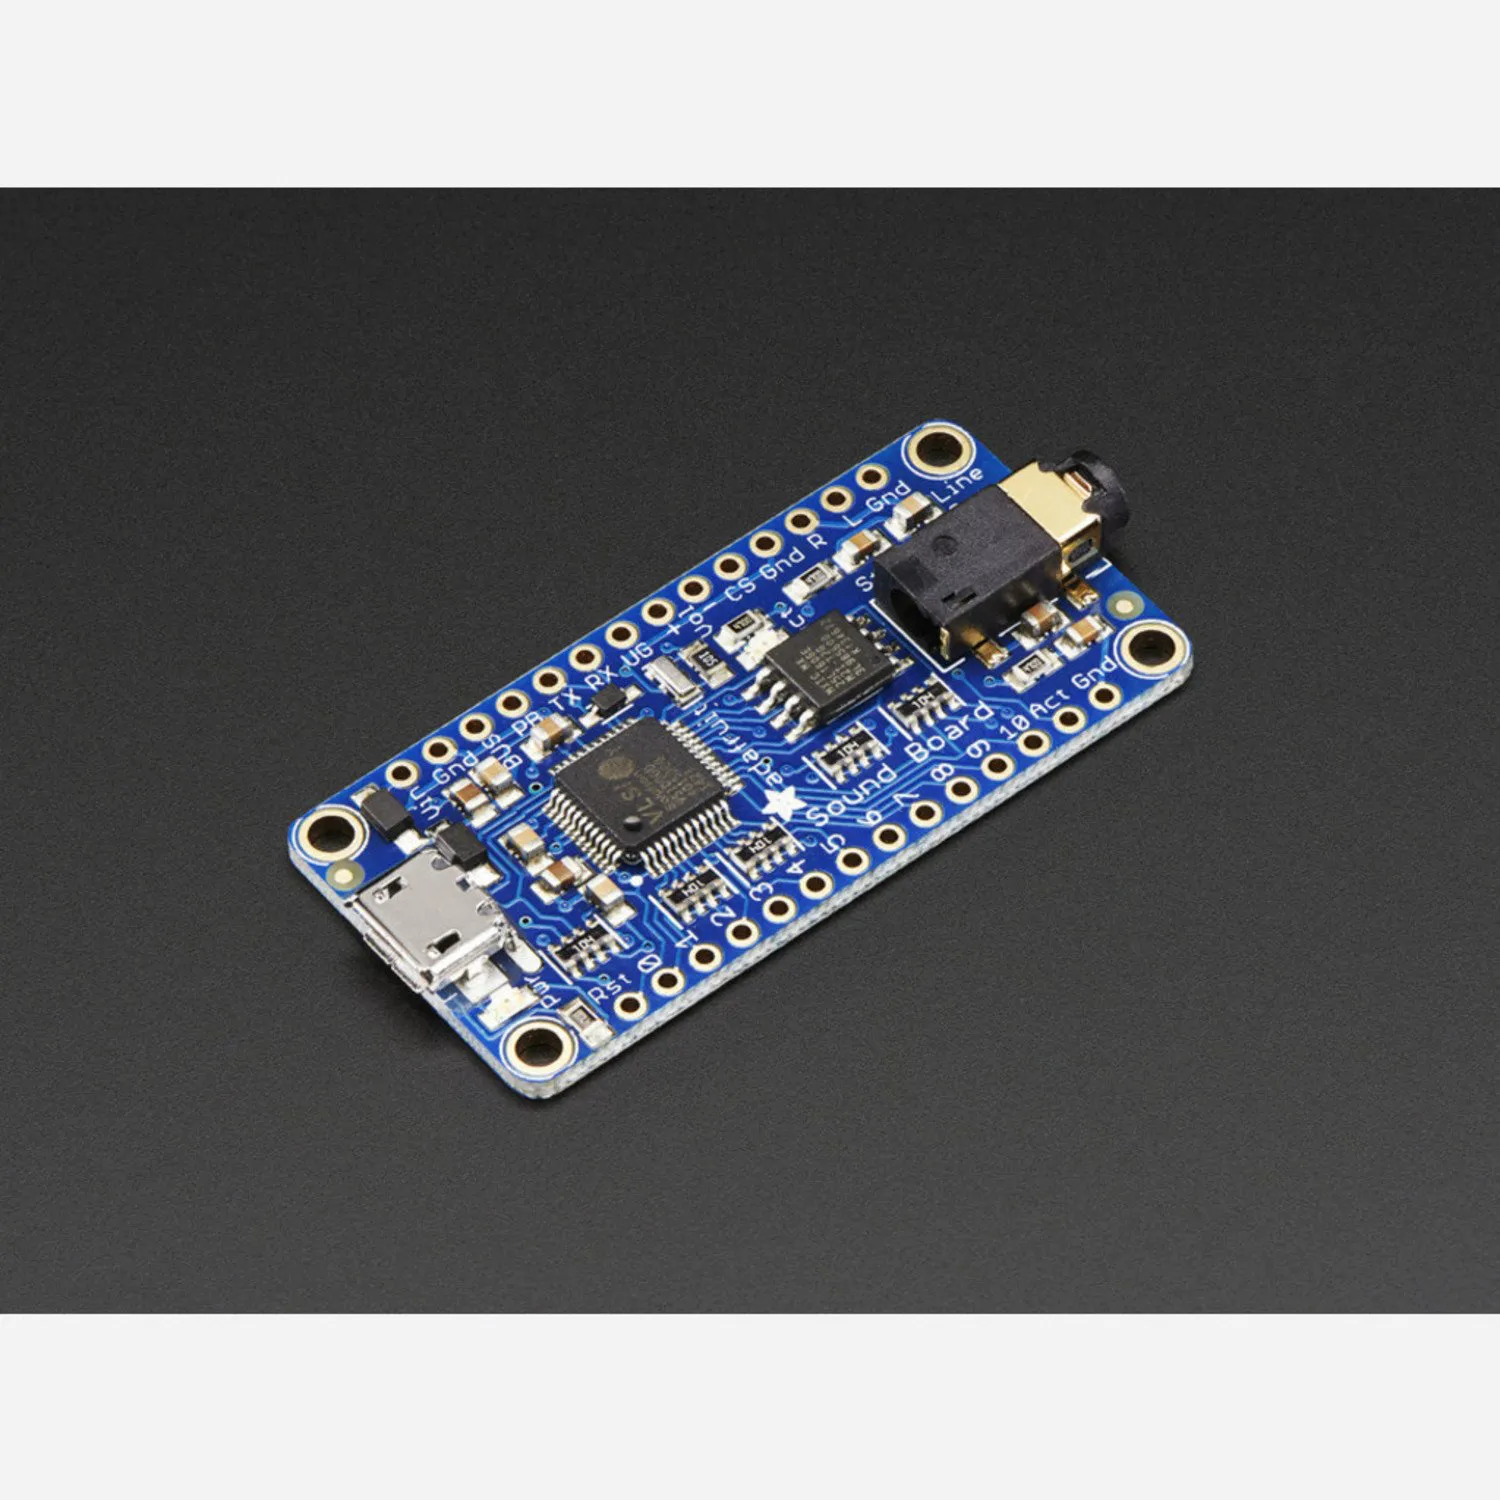 Photo of Adafruit Audio FX Sound Board - WAV/OGG Trigger - 2MB storage - Headphone out only